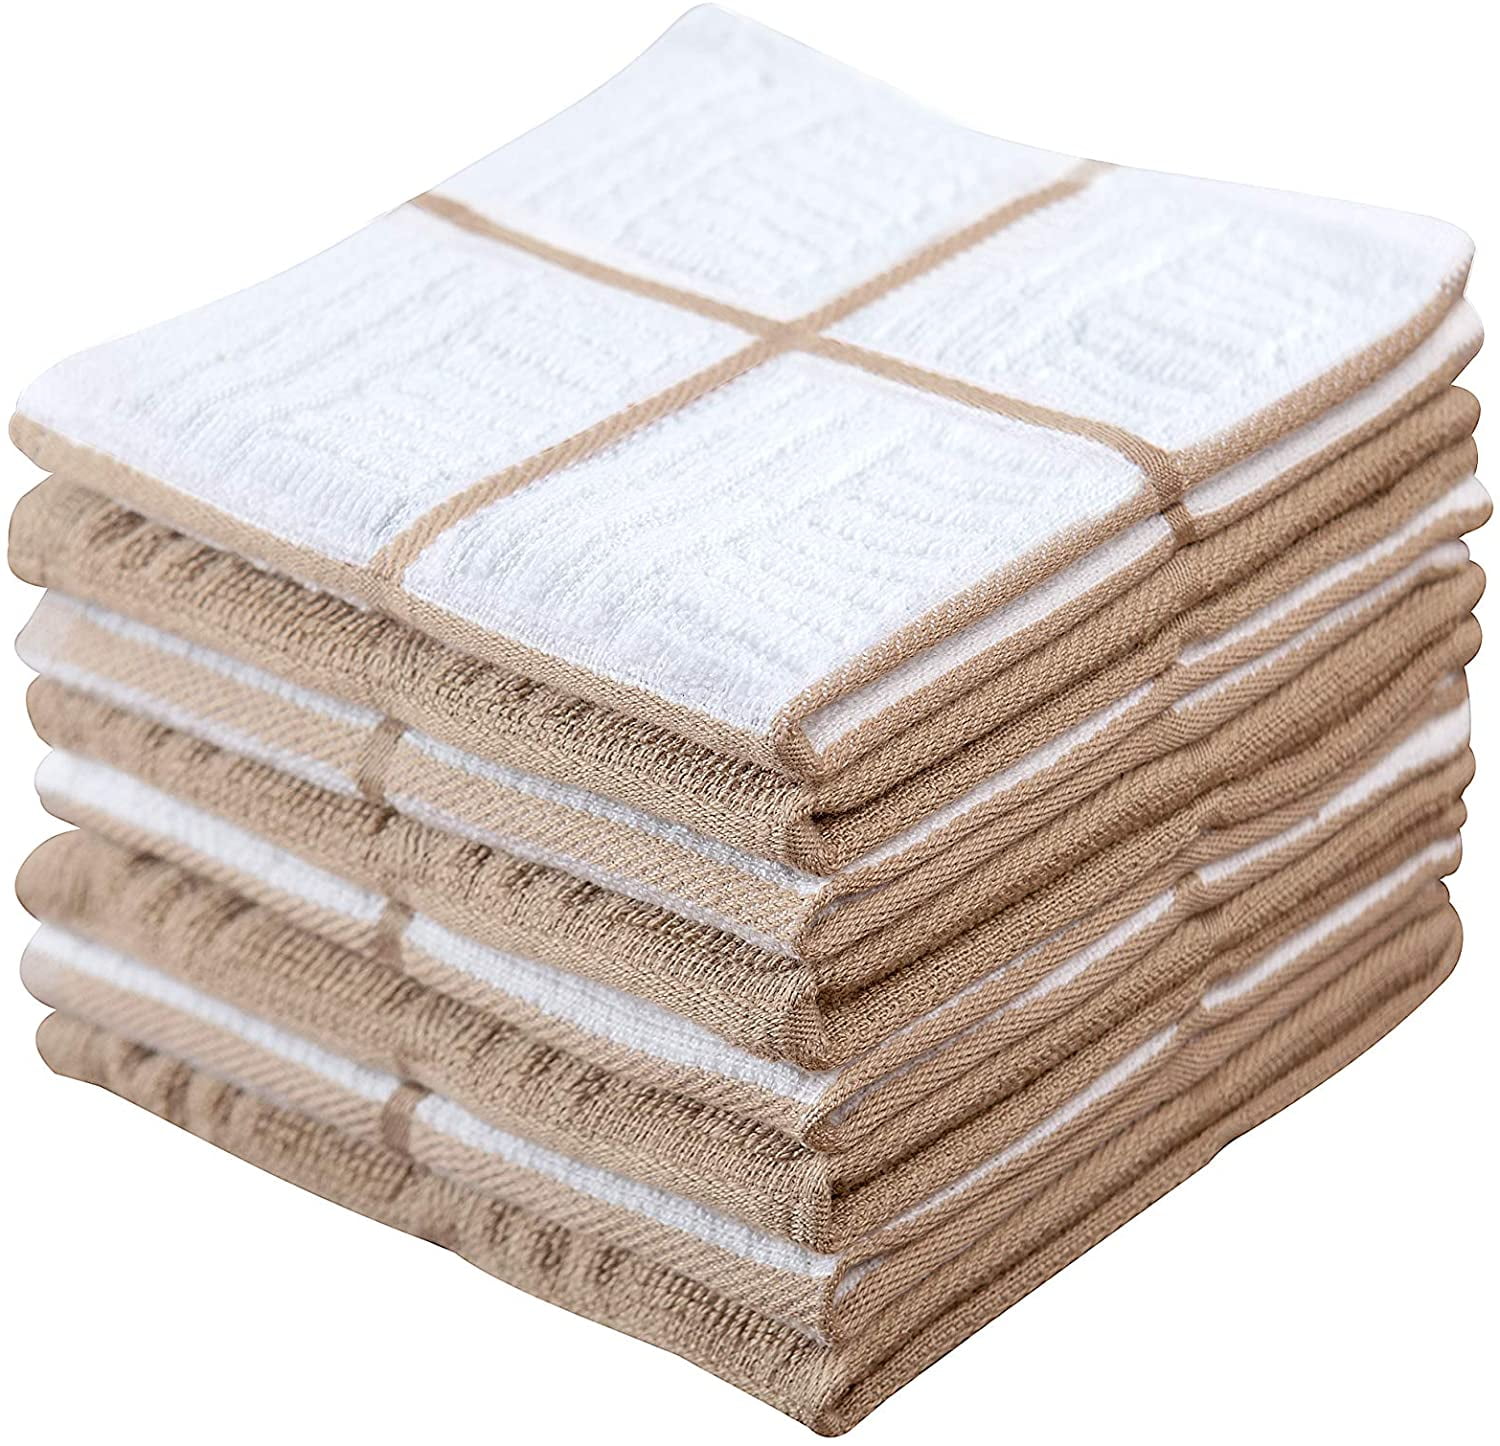 Sticky Toffee Kitchen Towels Dish Towels 100% Cotton, Set of 4, Tan and White Hand Towels, Tea Towels, Reusable Absorbent Cleaning Cloths, 28 in x 16